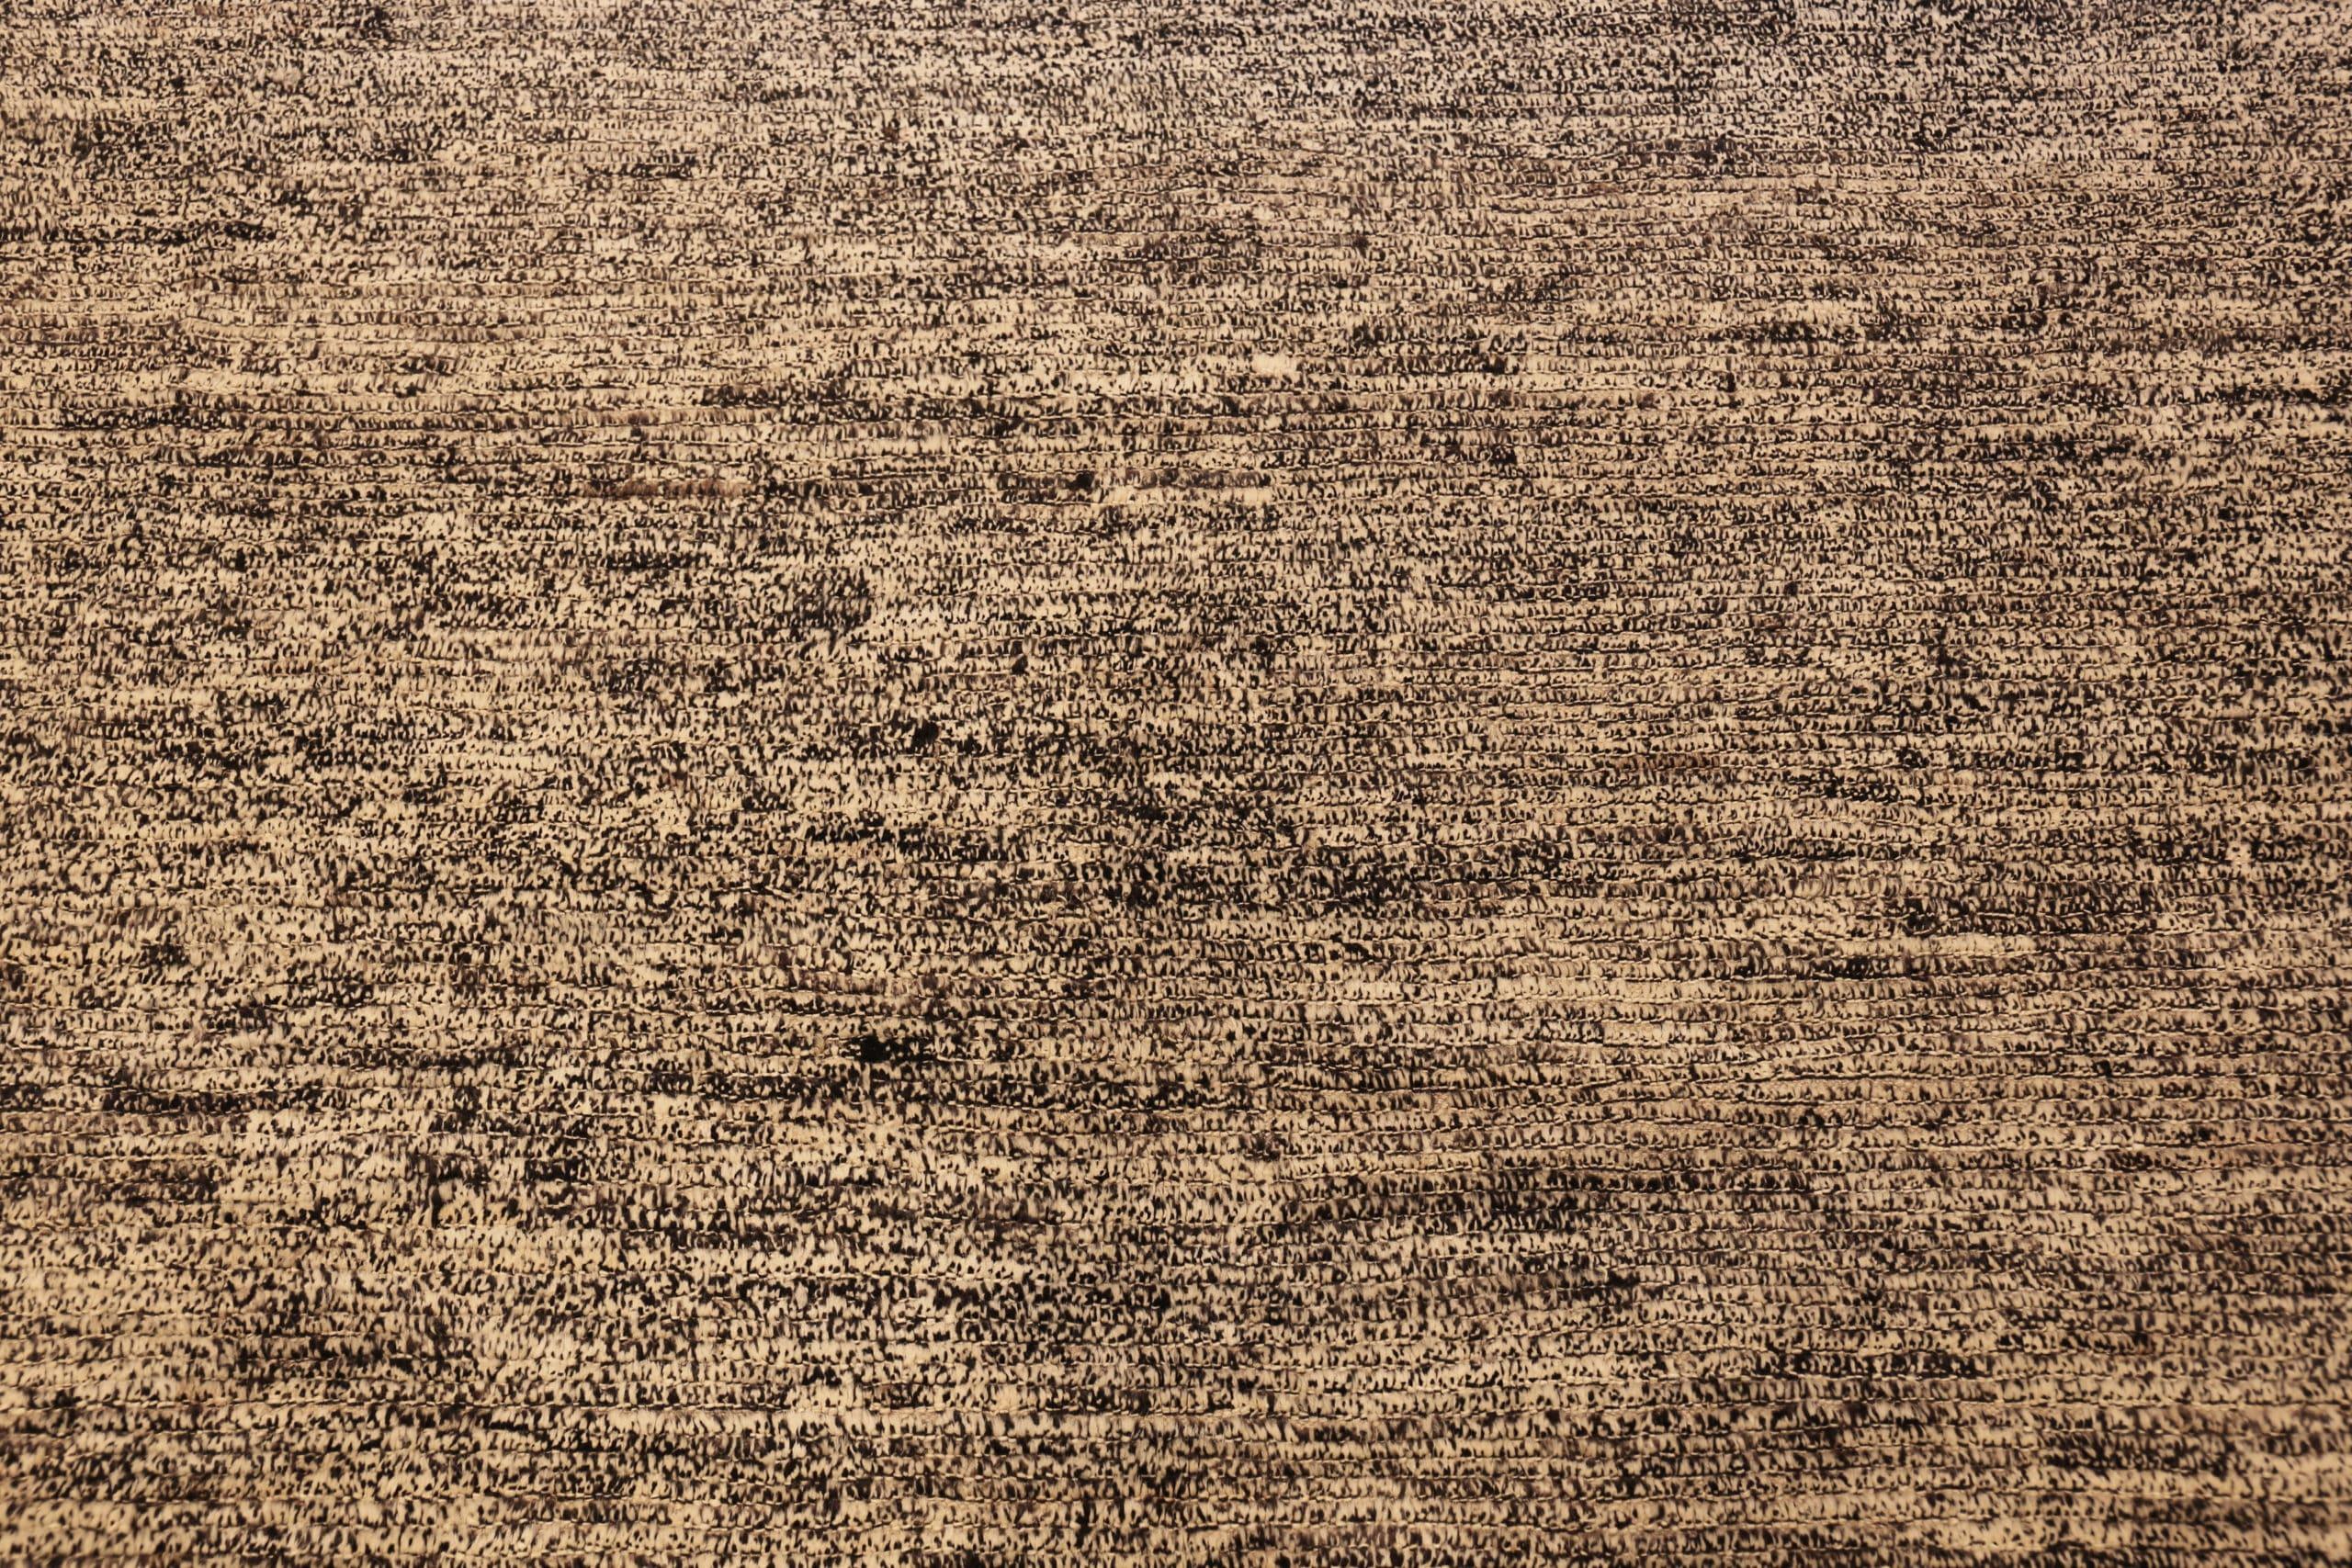 Textured Beige Modern Distressed Rug, Pays d'origine : Afghanistan, Date de création : Moderne. Taille : 2,9 m x 3,51 m (9 ft 6 in x 11 ft 6 in)
 